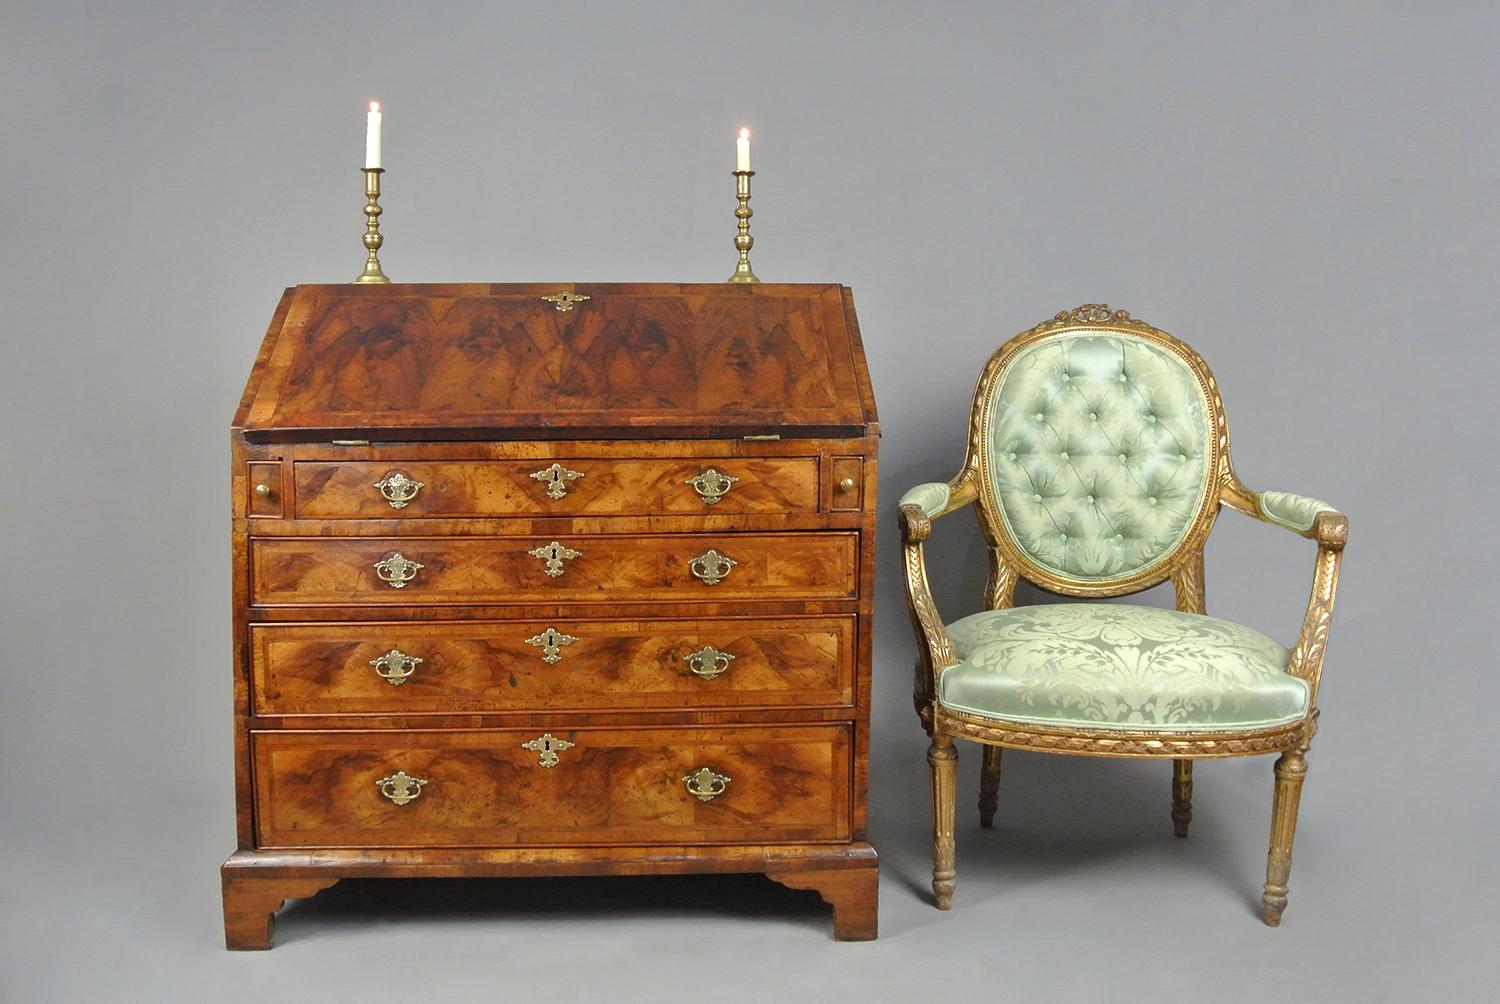 18th Century Exceptional George II Yew Wood and Walnut Bureau c. 1750 For Sale